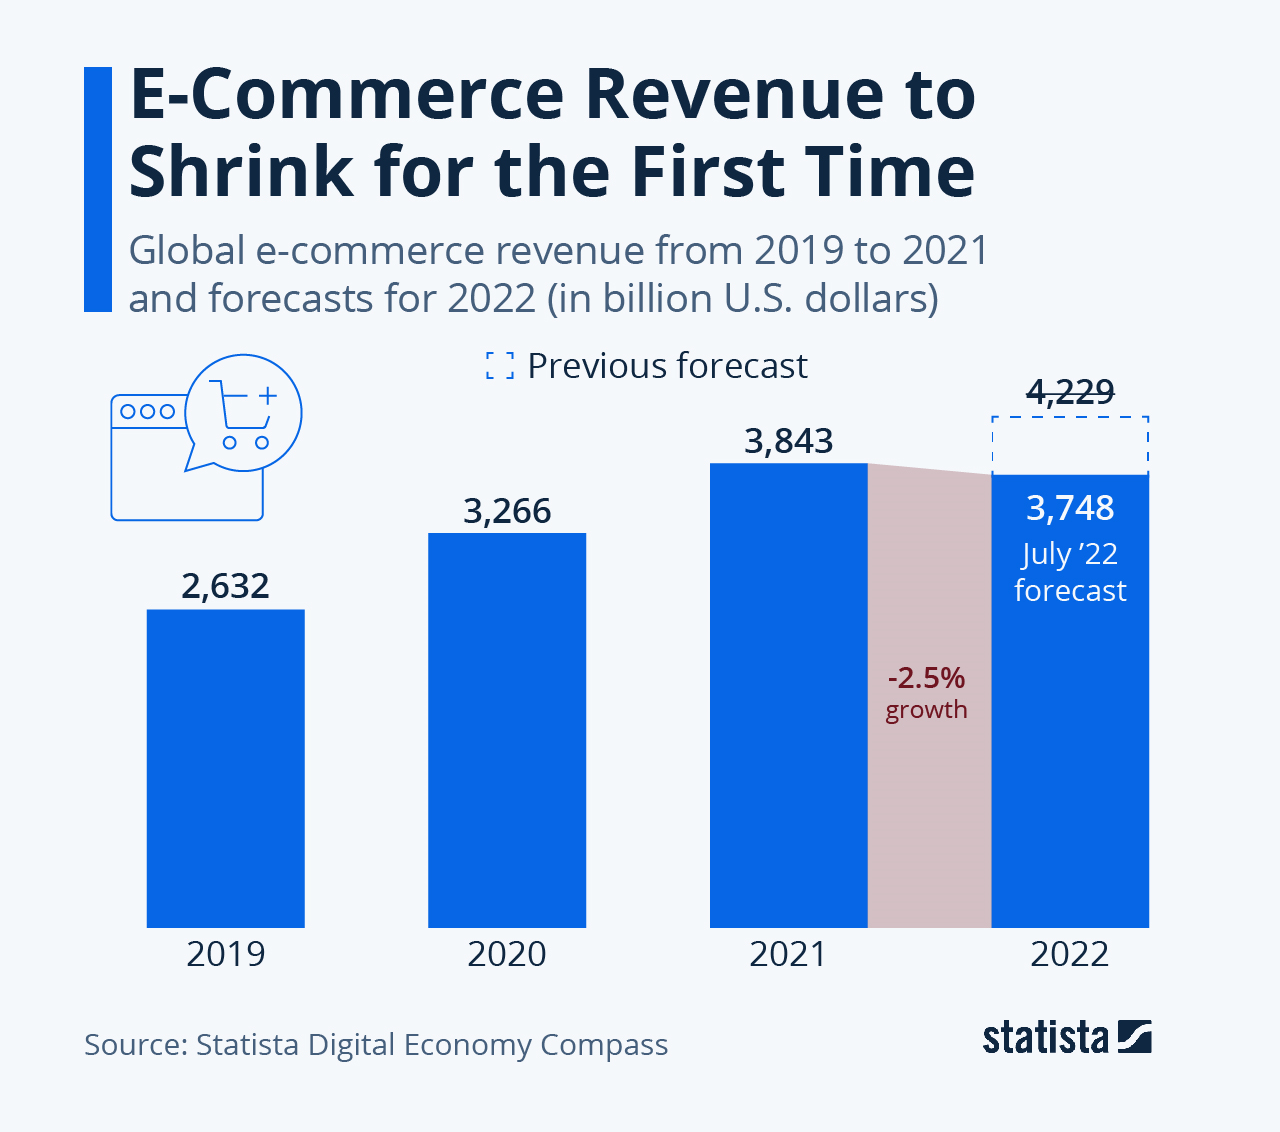 Statista's Data Shows That eCommerce Will Experience Minor Decline In 2022